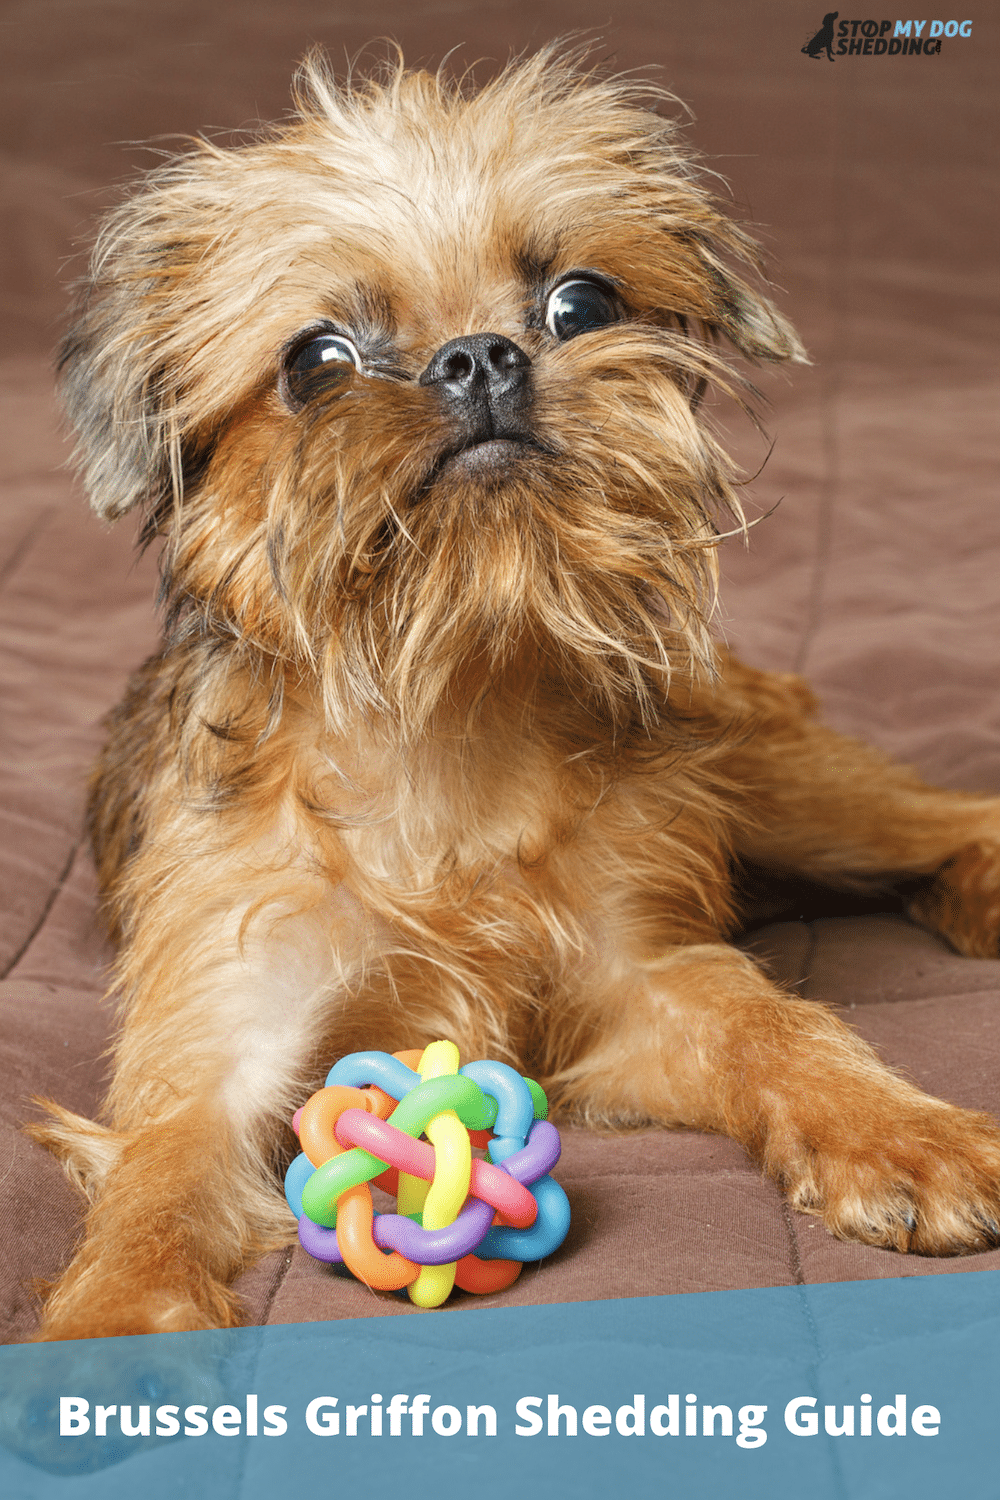 Do Brussels Griffon Dogs Shed?